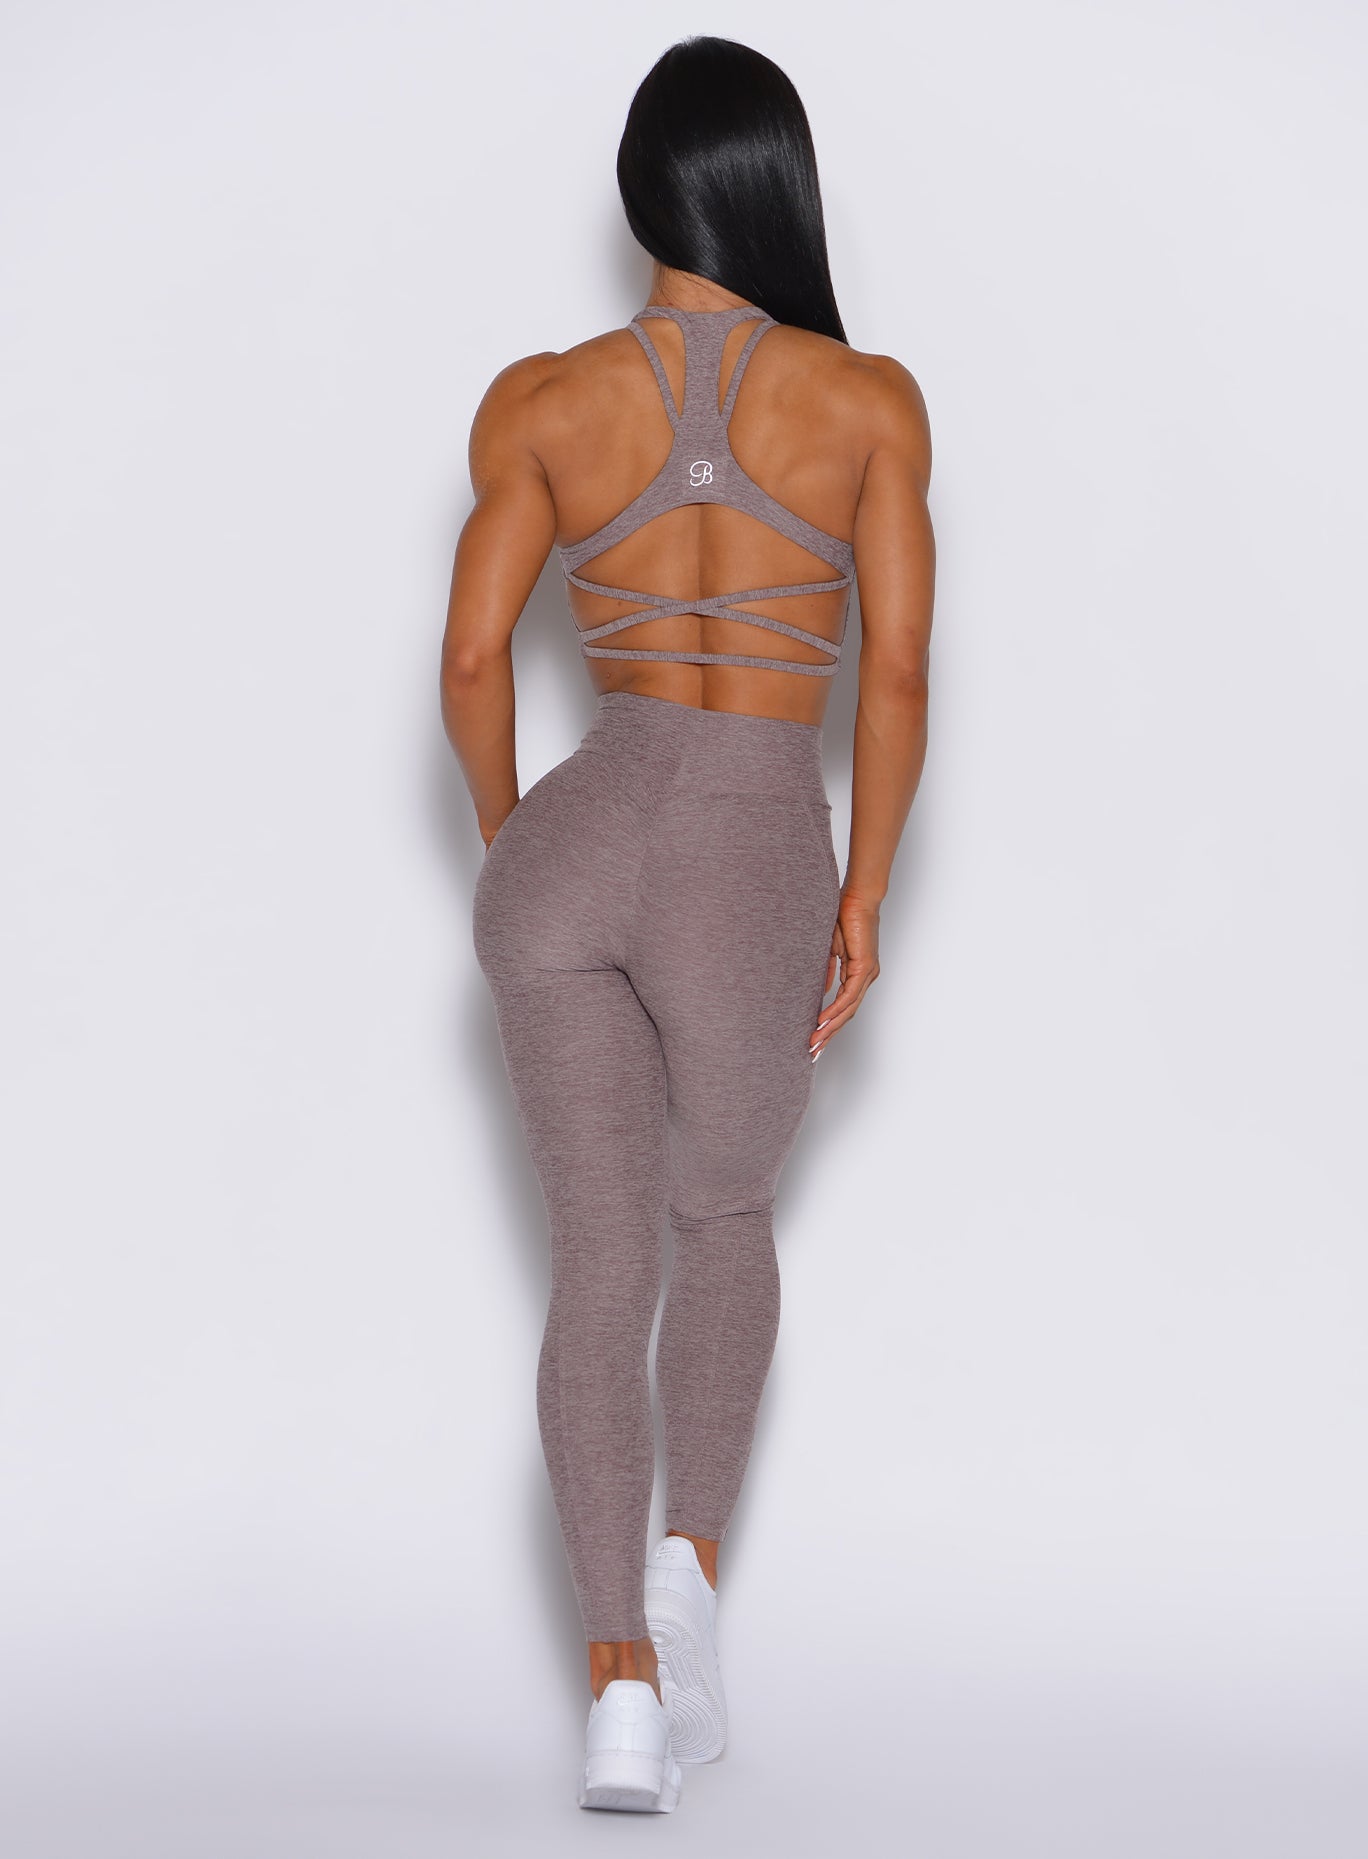 back profile view of a model wearing our curves leggings in london fogh color along with the matching sports bra